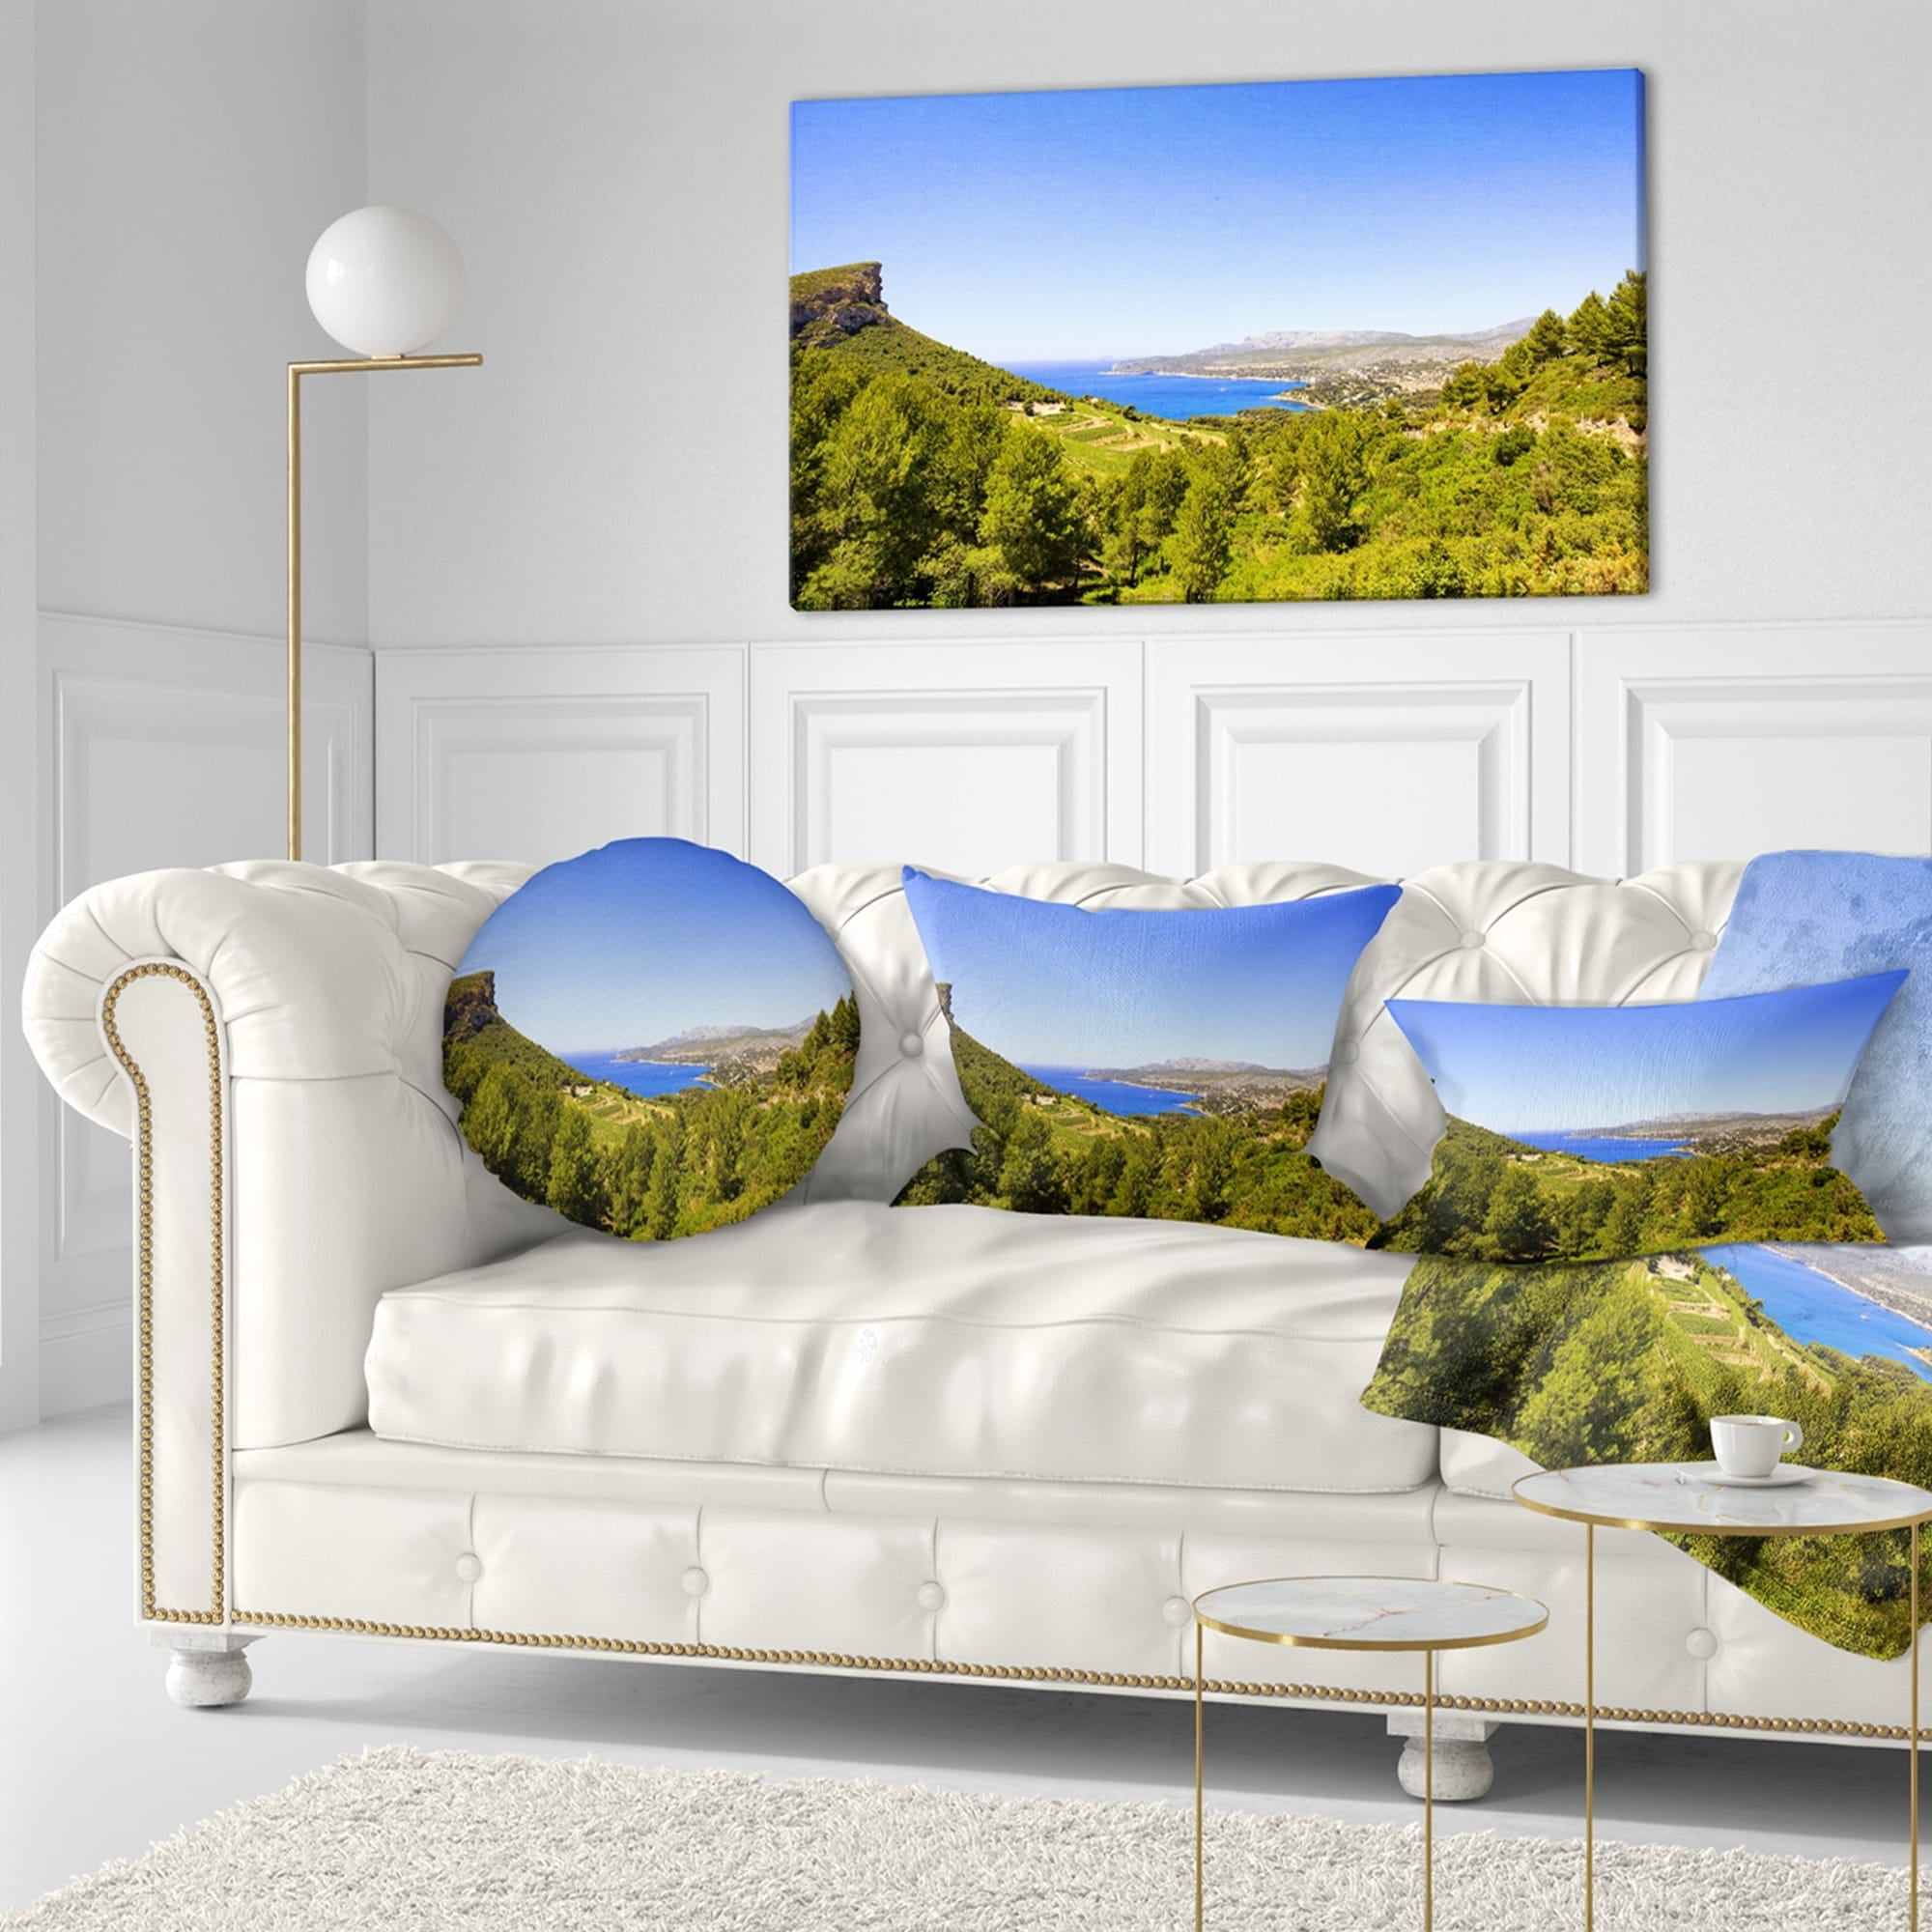 Sofa Throw Pillow 16 x 16 Designart CU11380-16-16 Cassis Bay from Route des Cretes Landscape Wall Cushion Cover for Living Room 